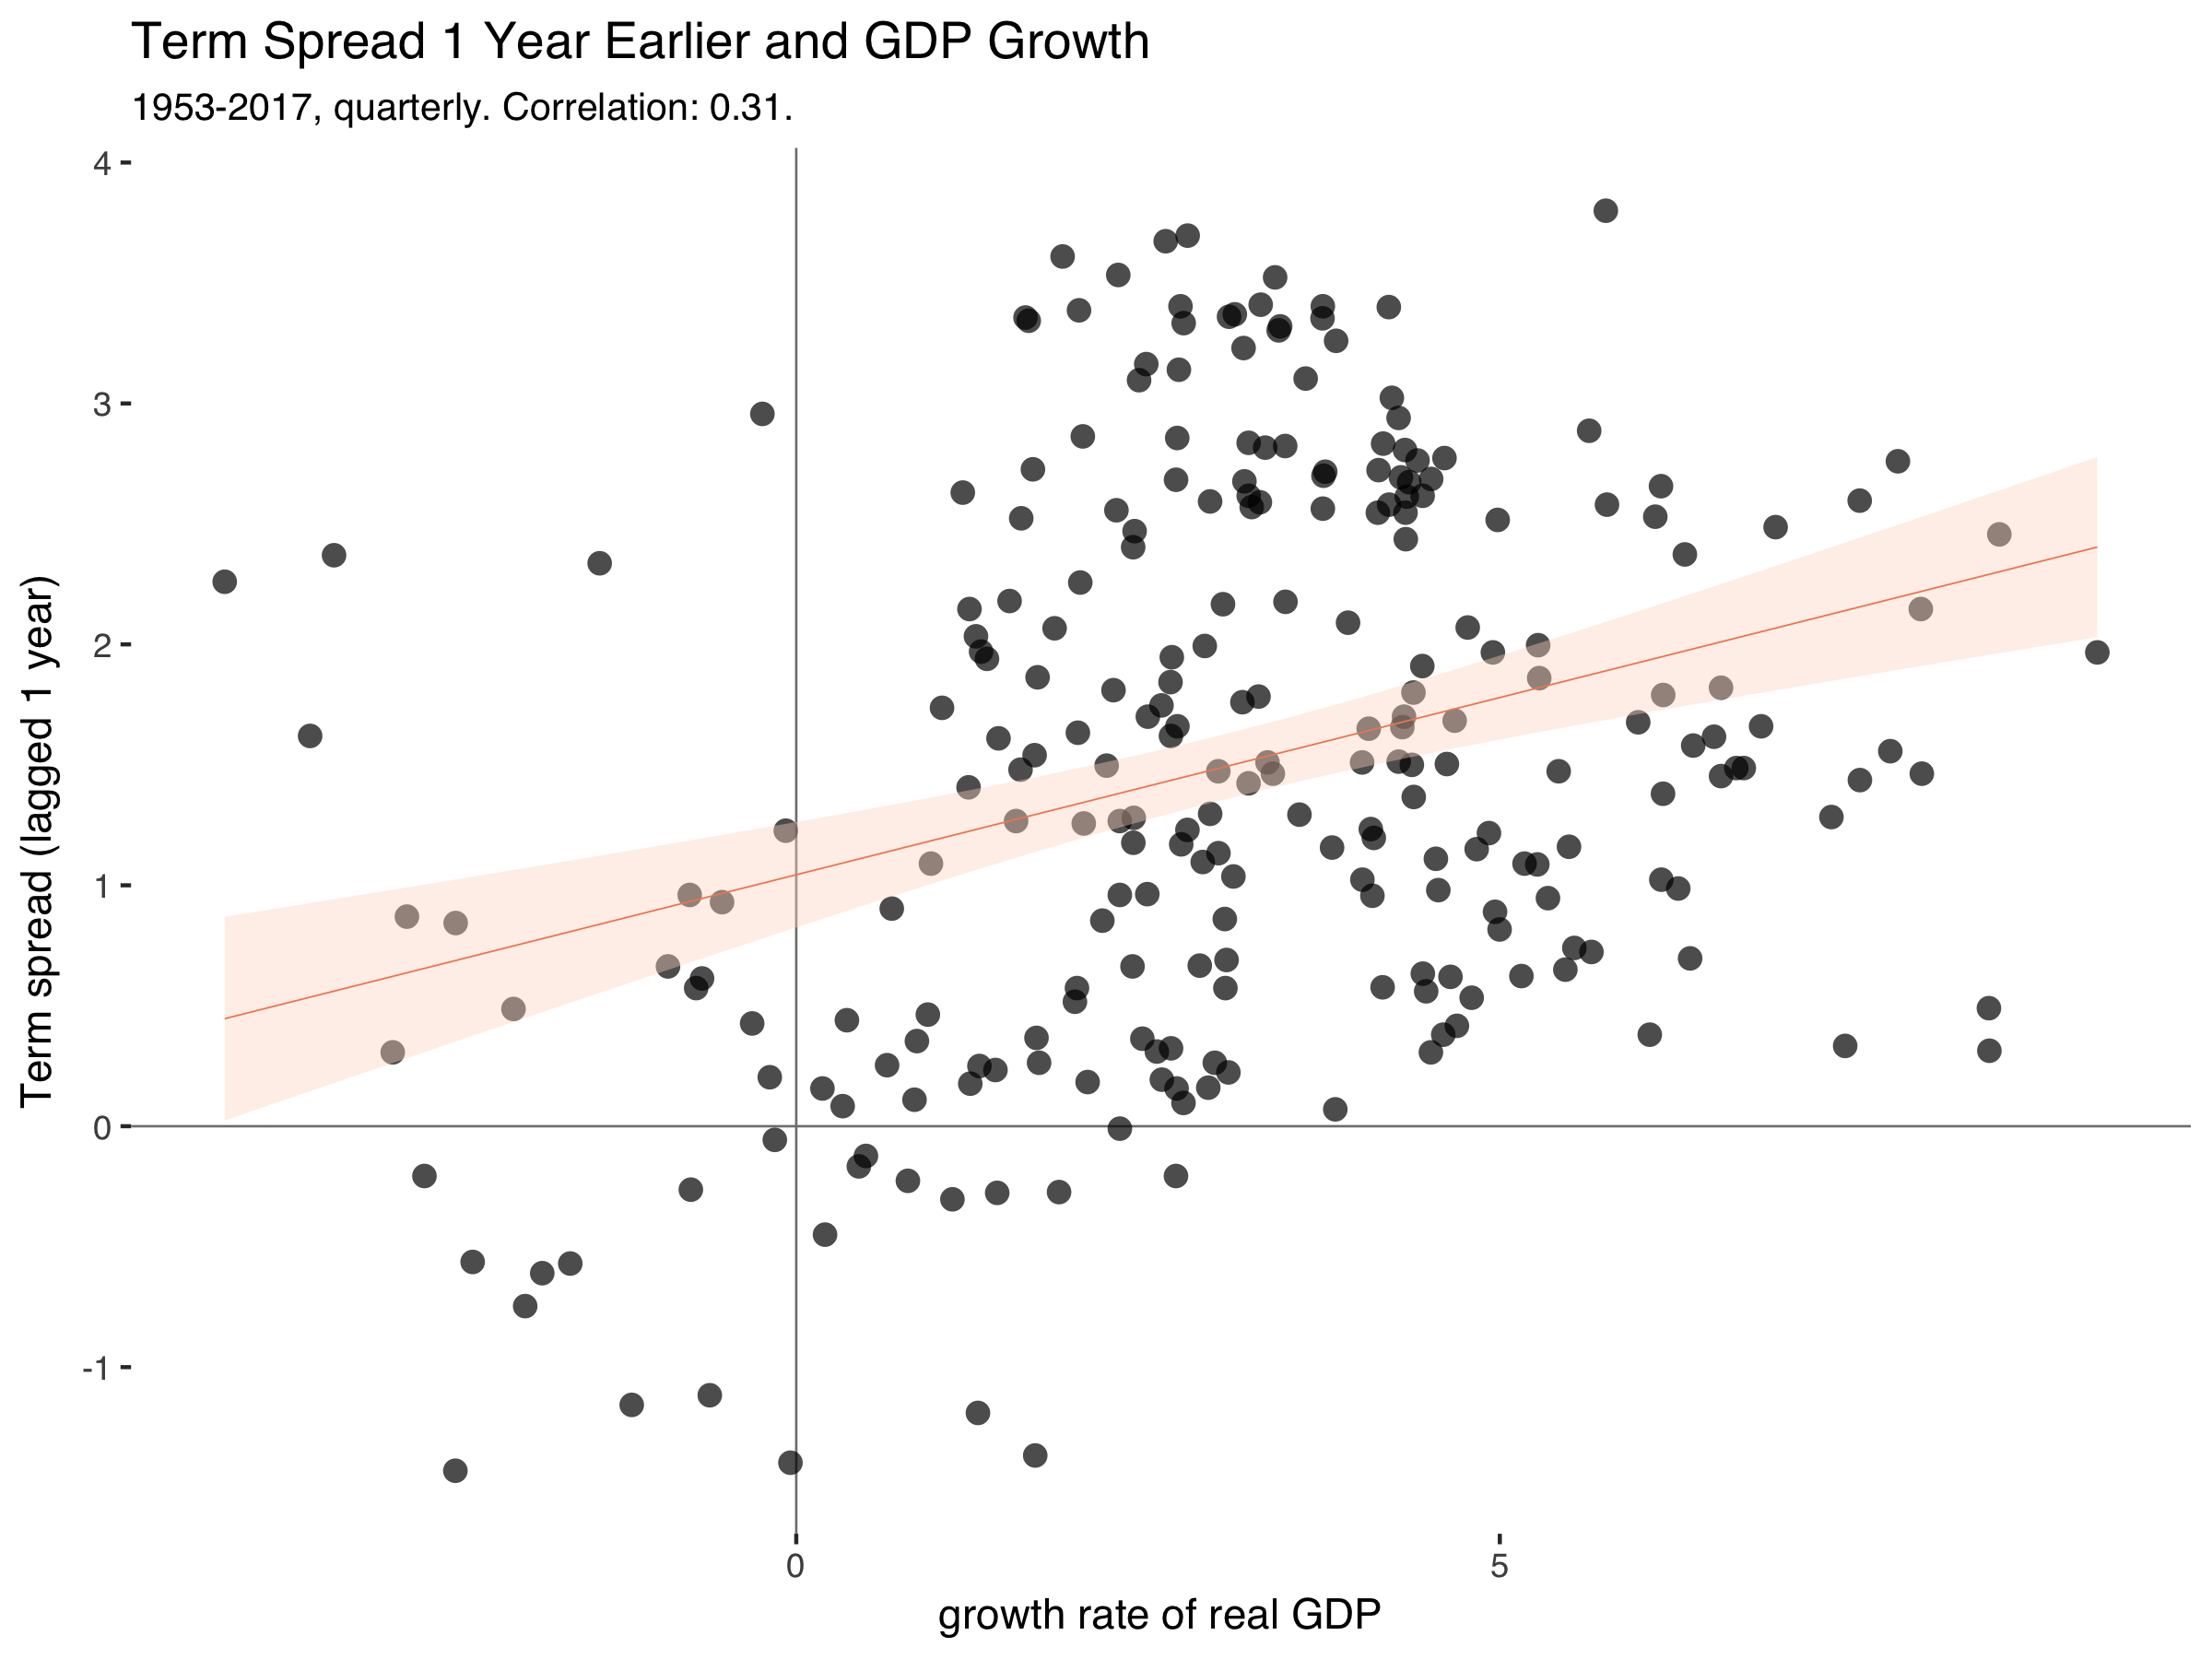 Term spread 1 year earlier and GDP growth